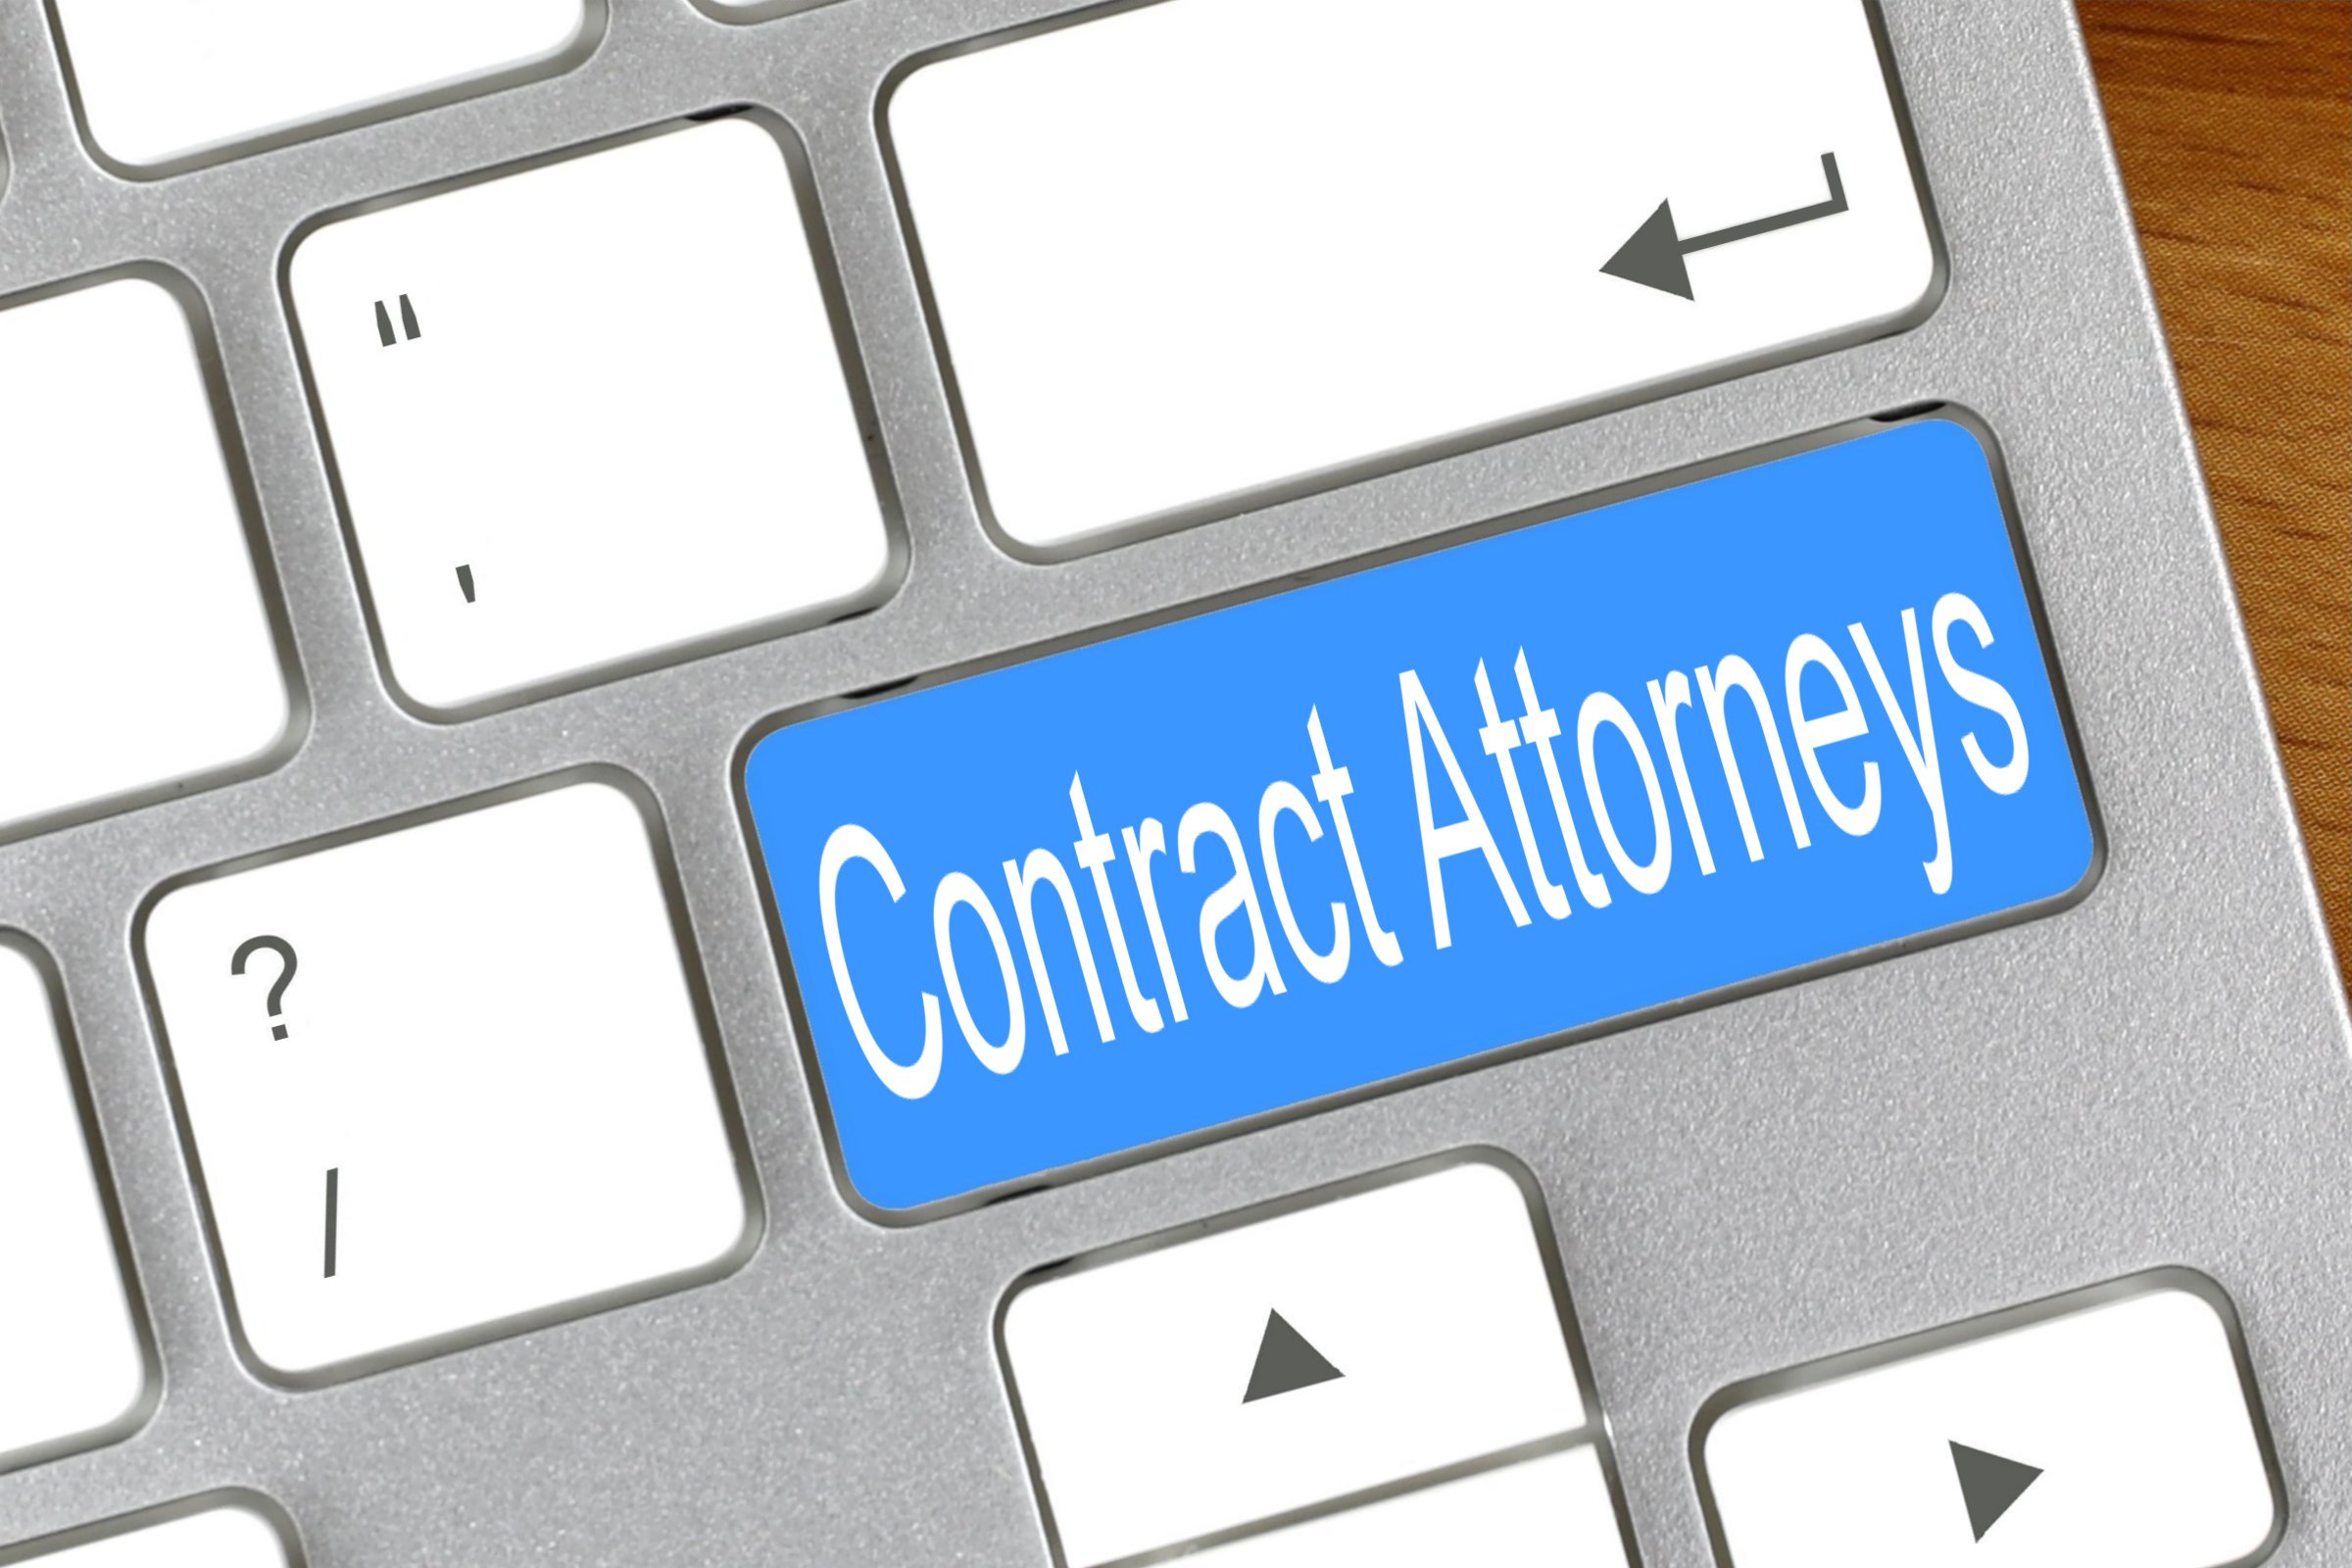 contract attorneys